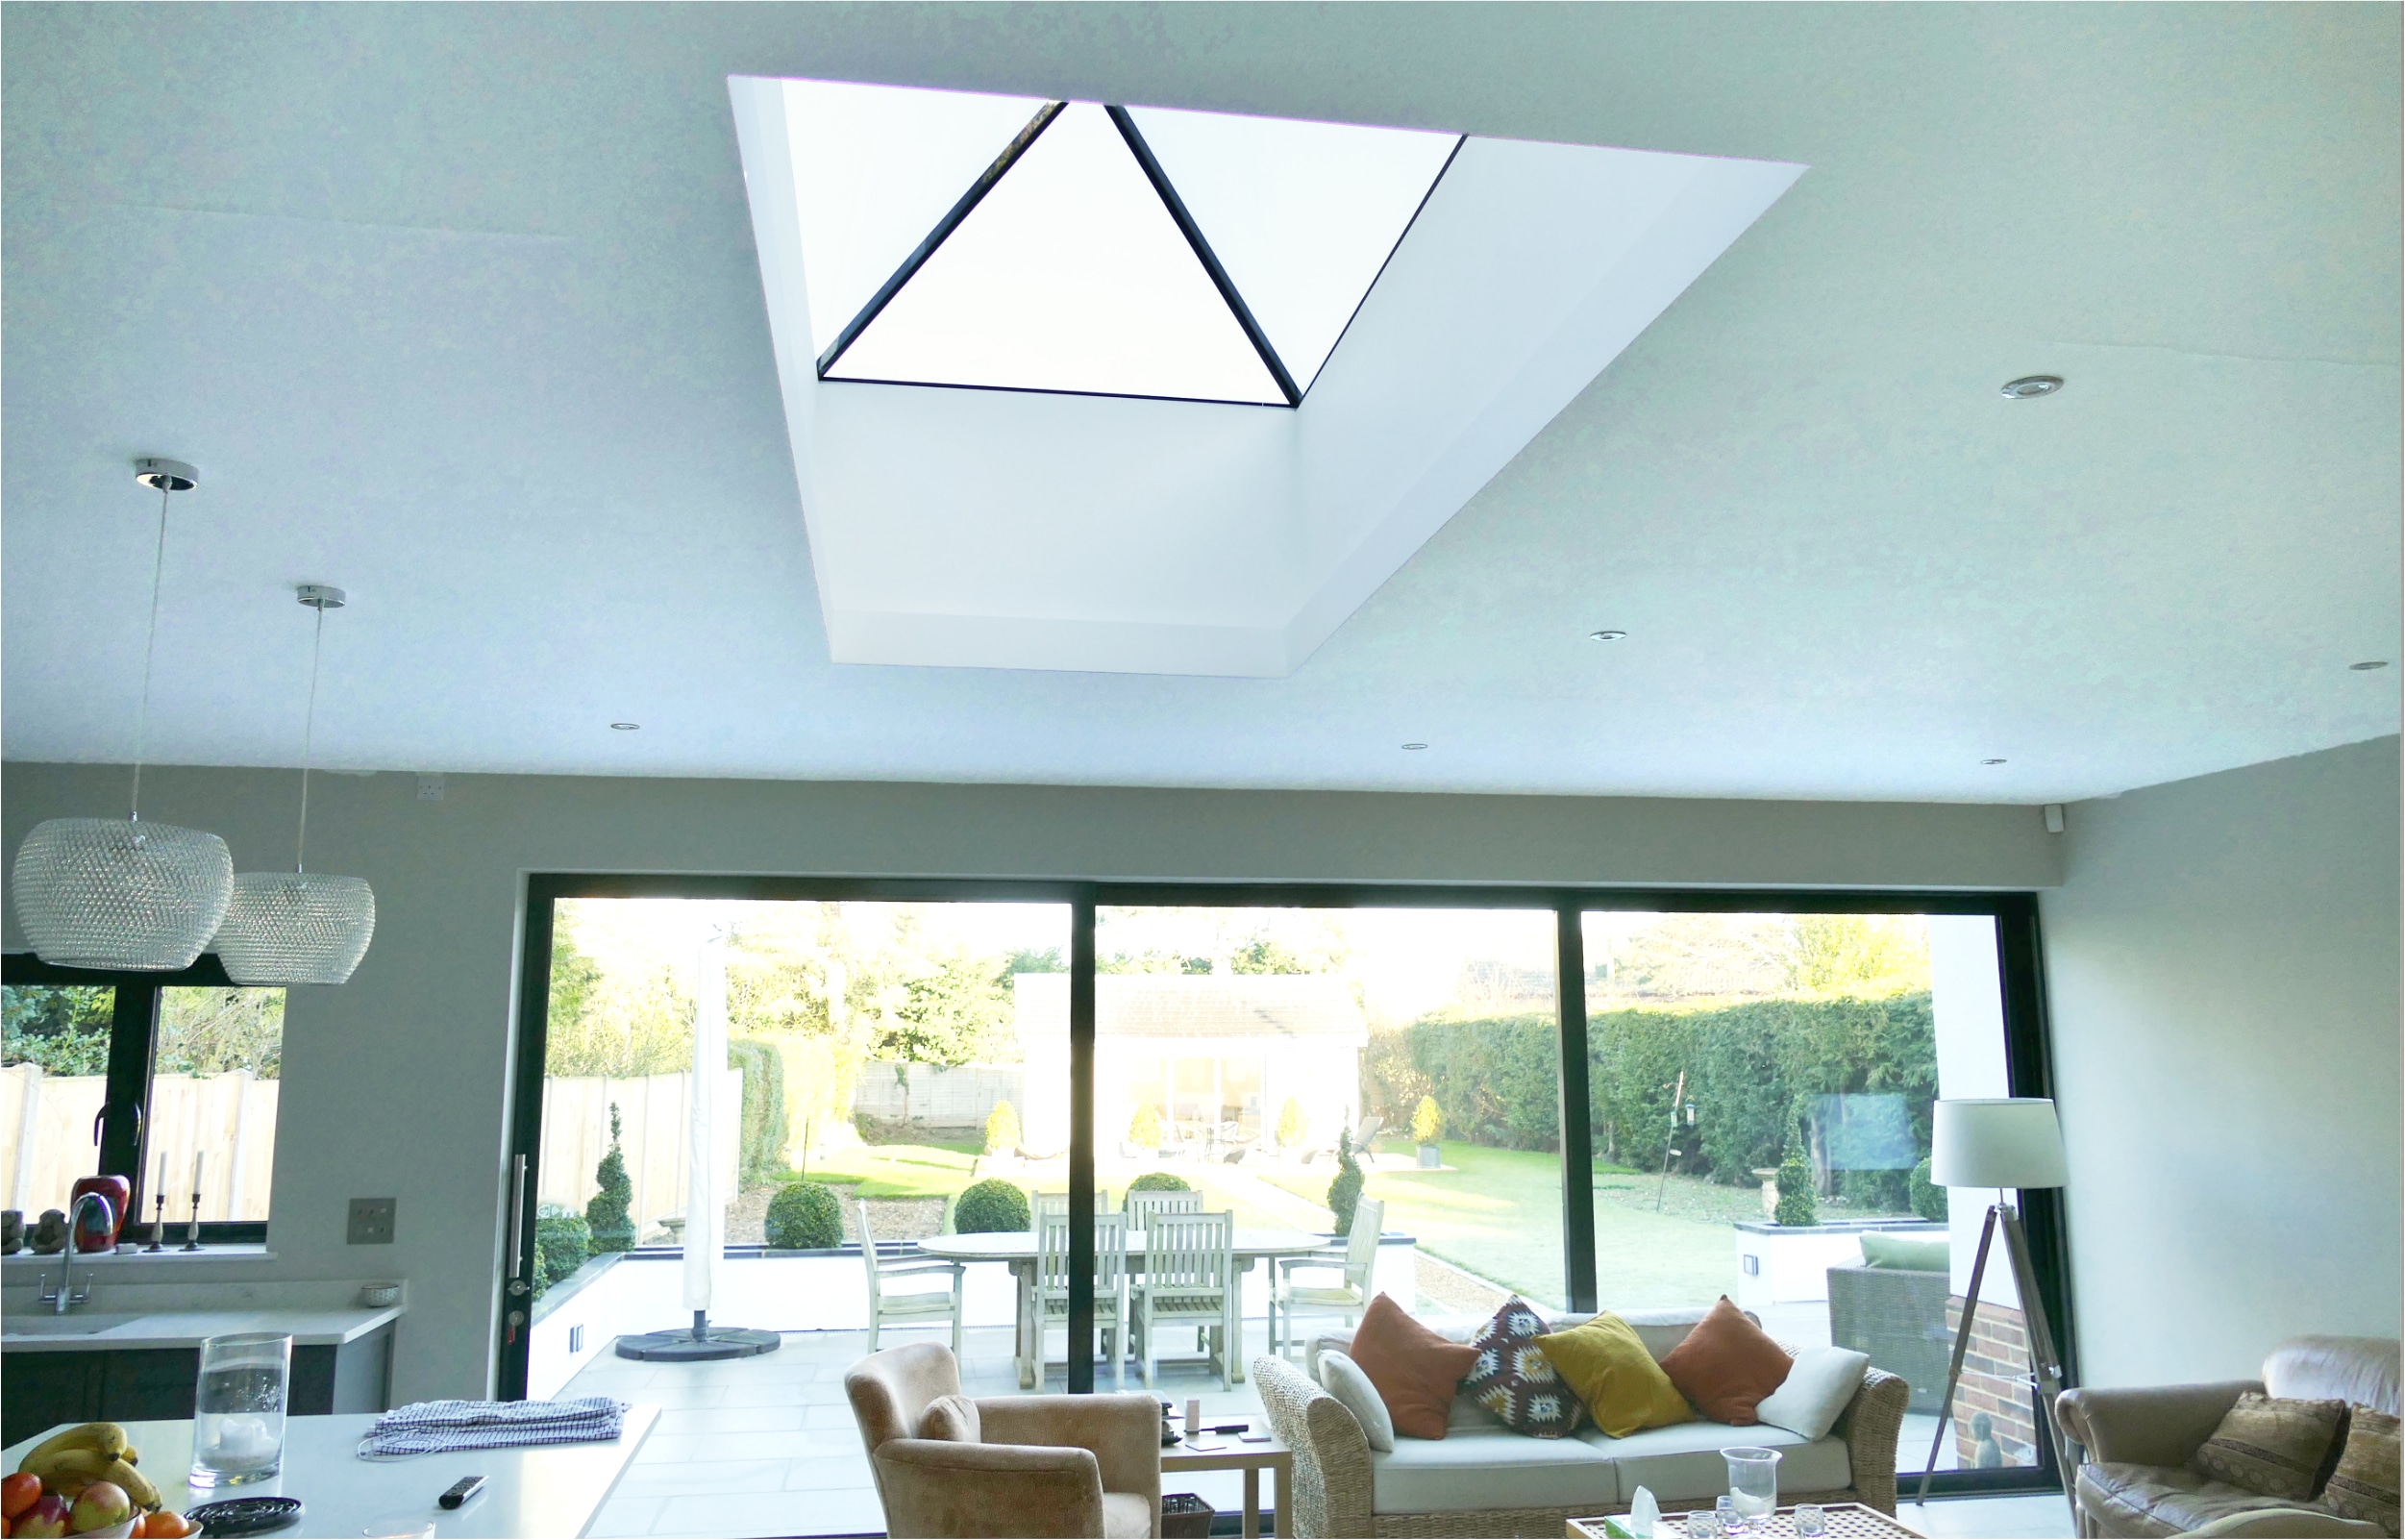 Roof Lanterns For Pitched Roofs